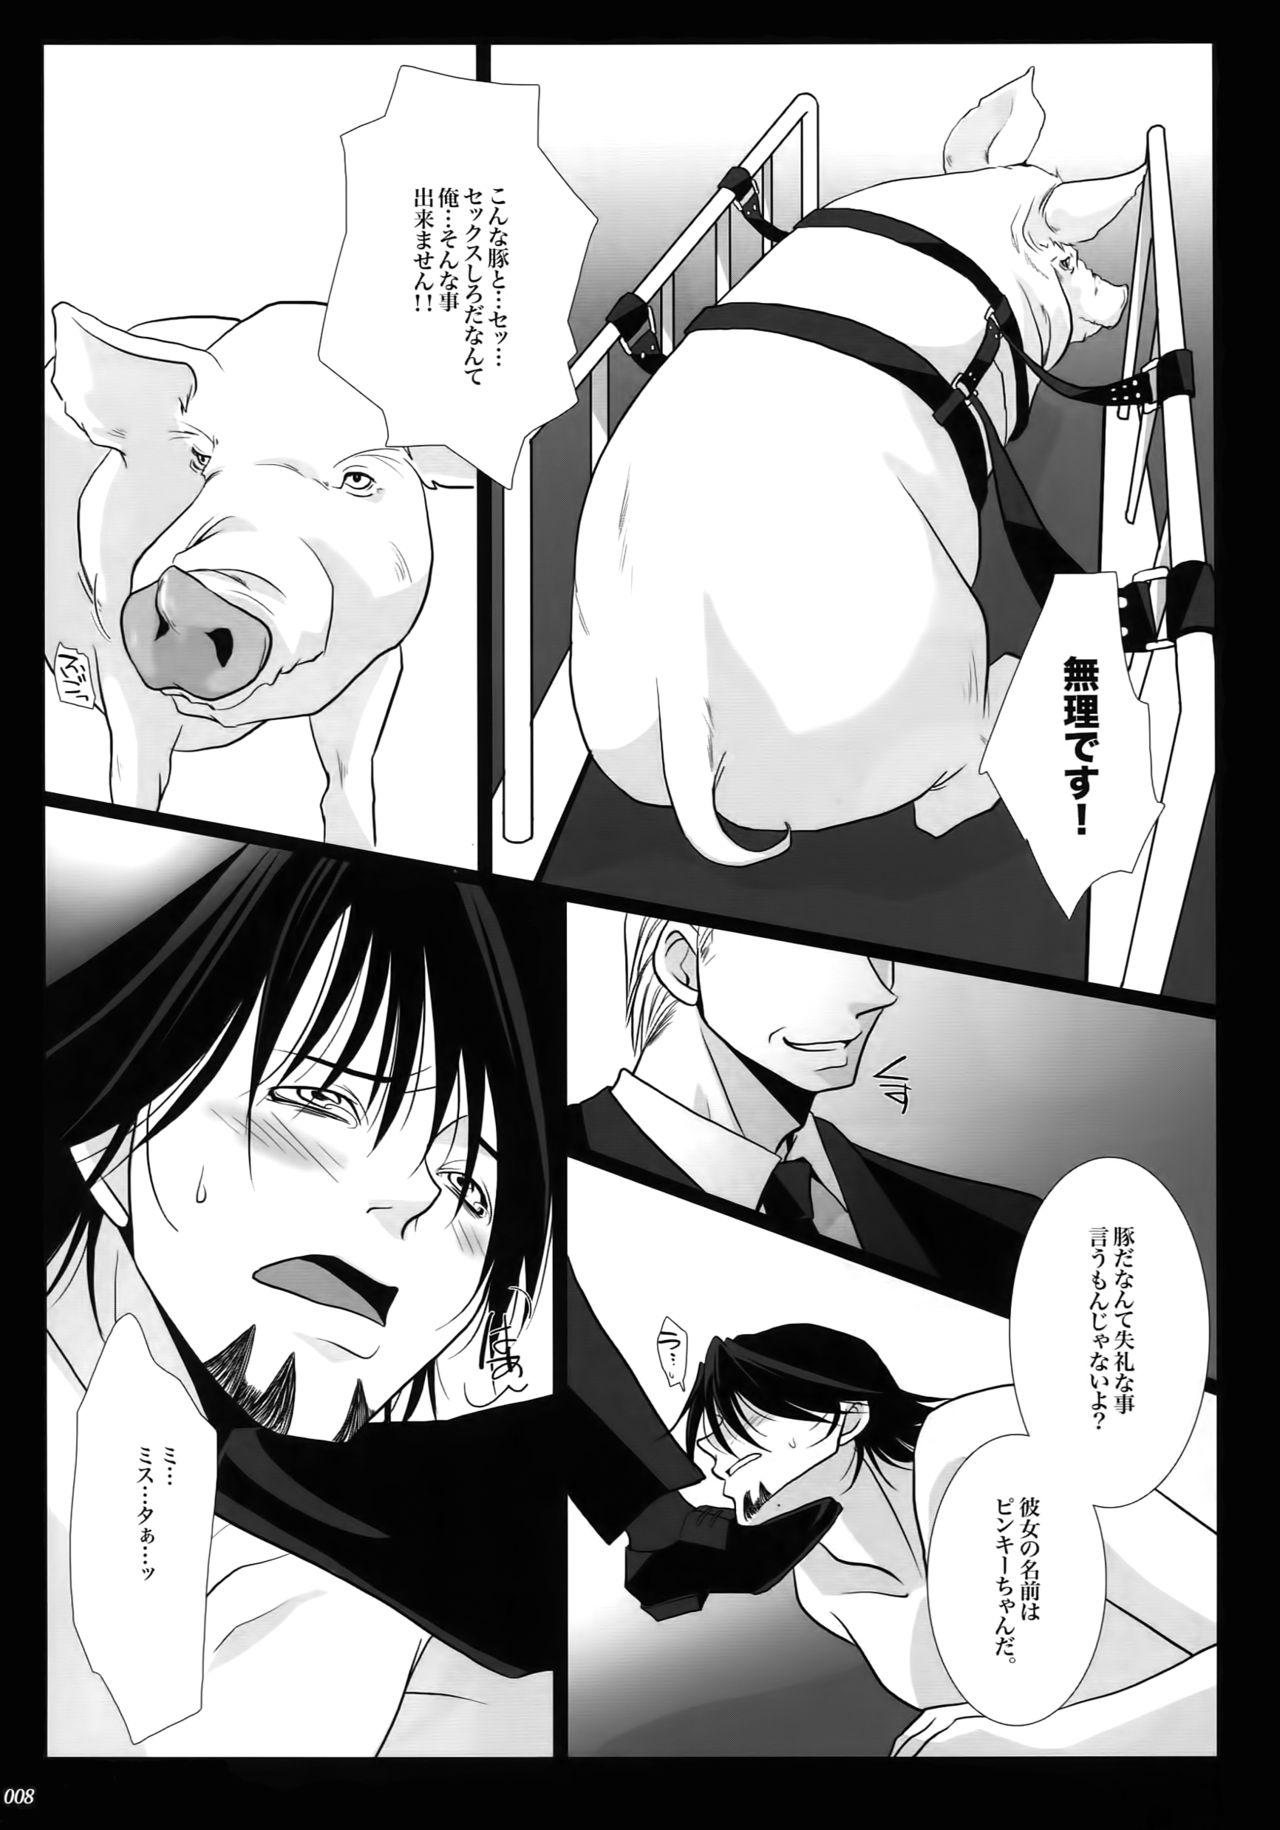 Teens mob;Re - Tiger and bunny Scene - Page 7